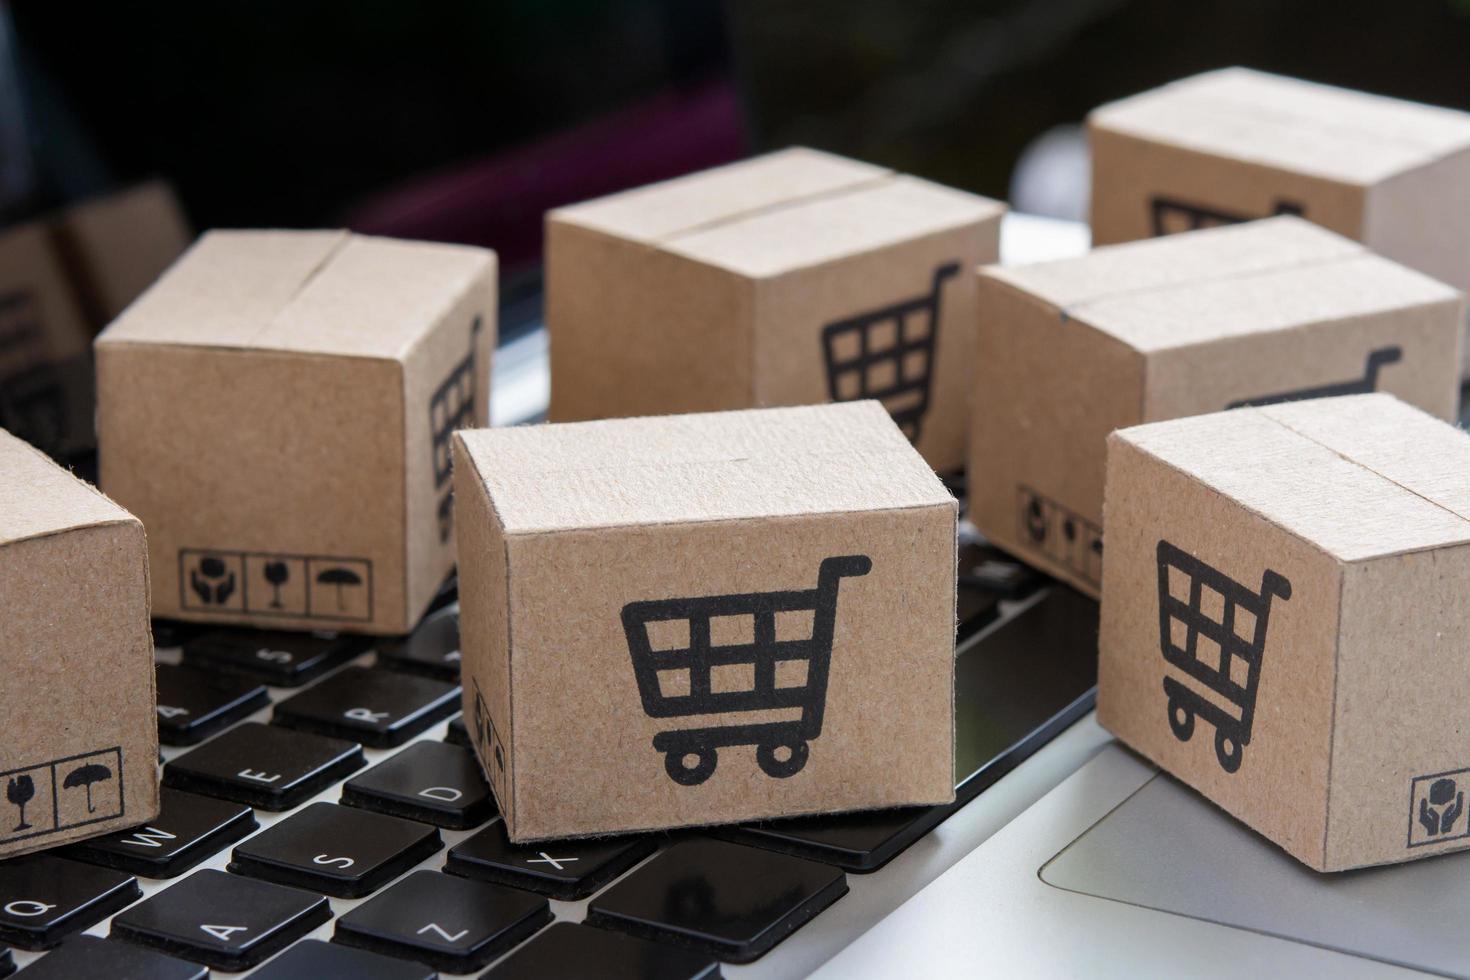 Online shopping - Paper cartons or parcel with a shopping cart logo on a laptop keyboard. Shopping service on The online web and offers home delivery. photo